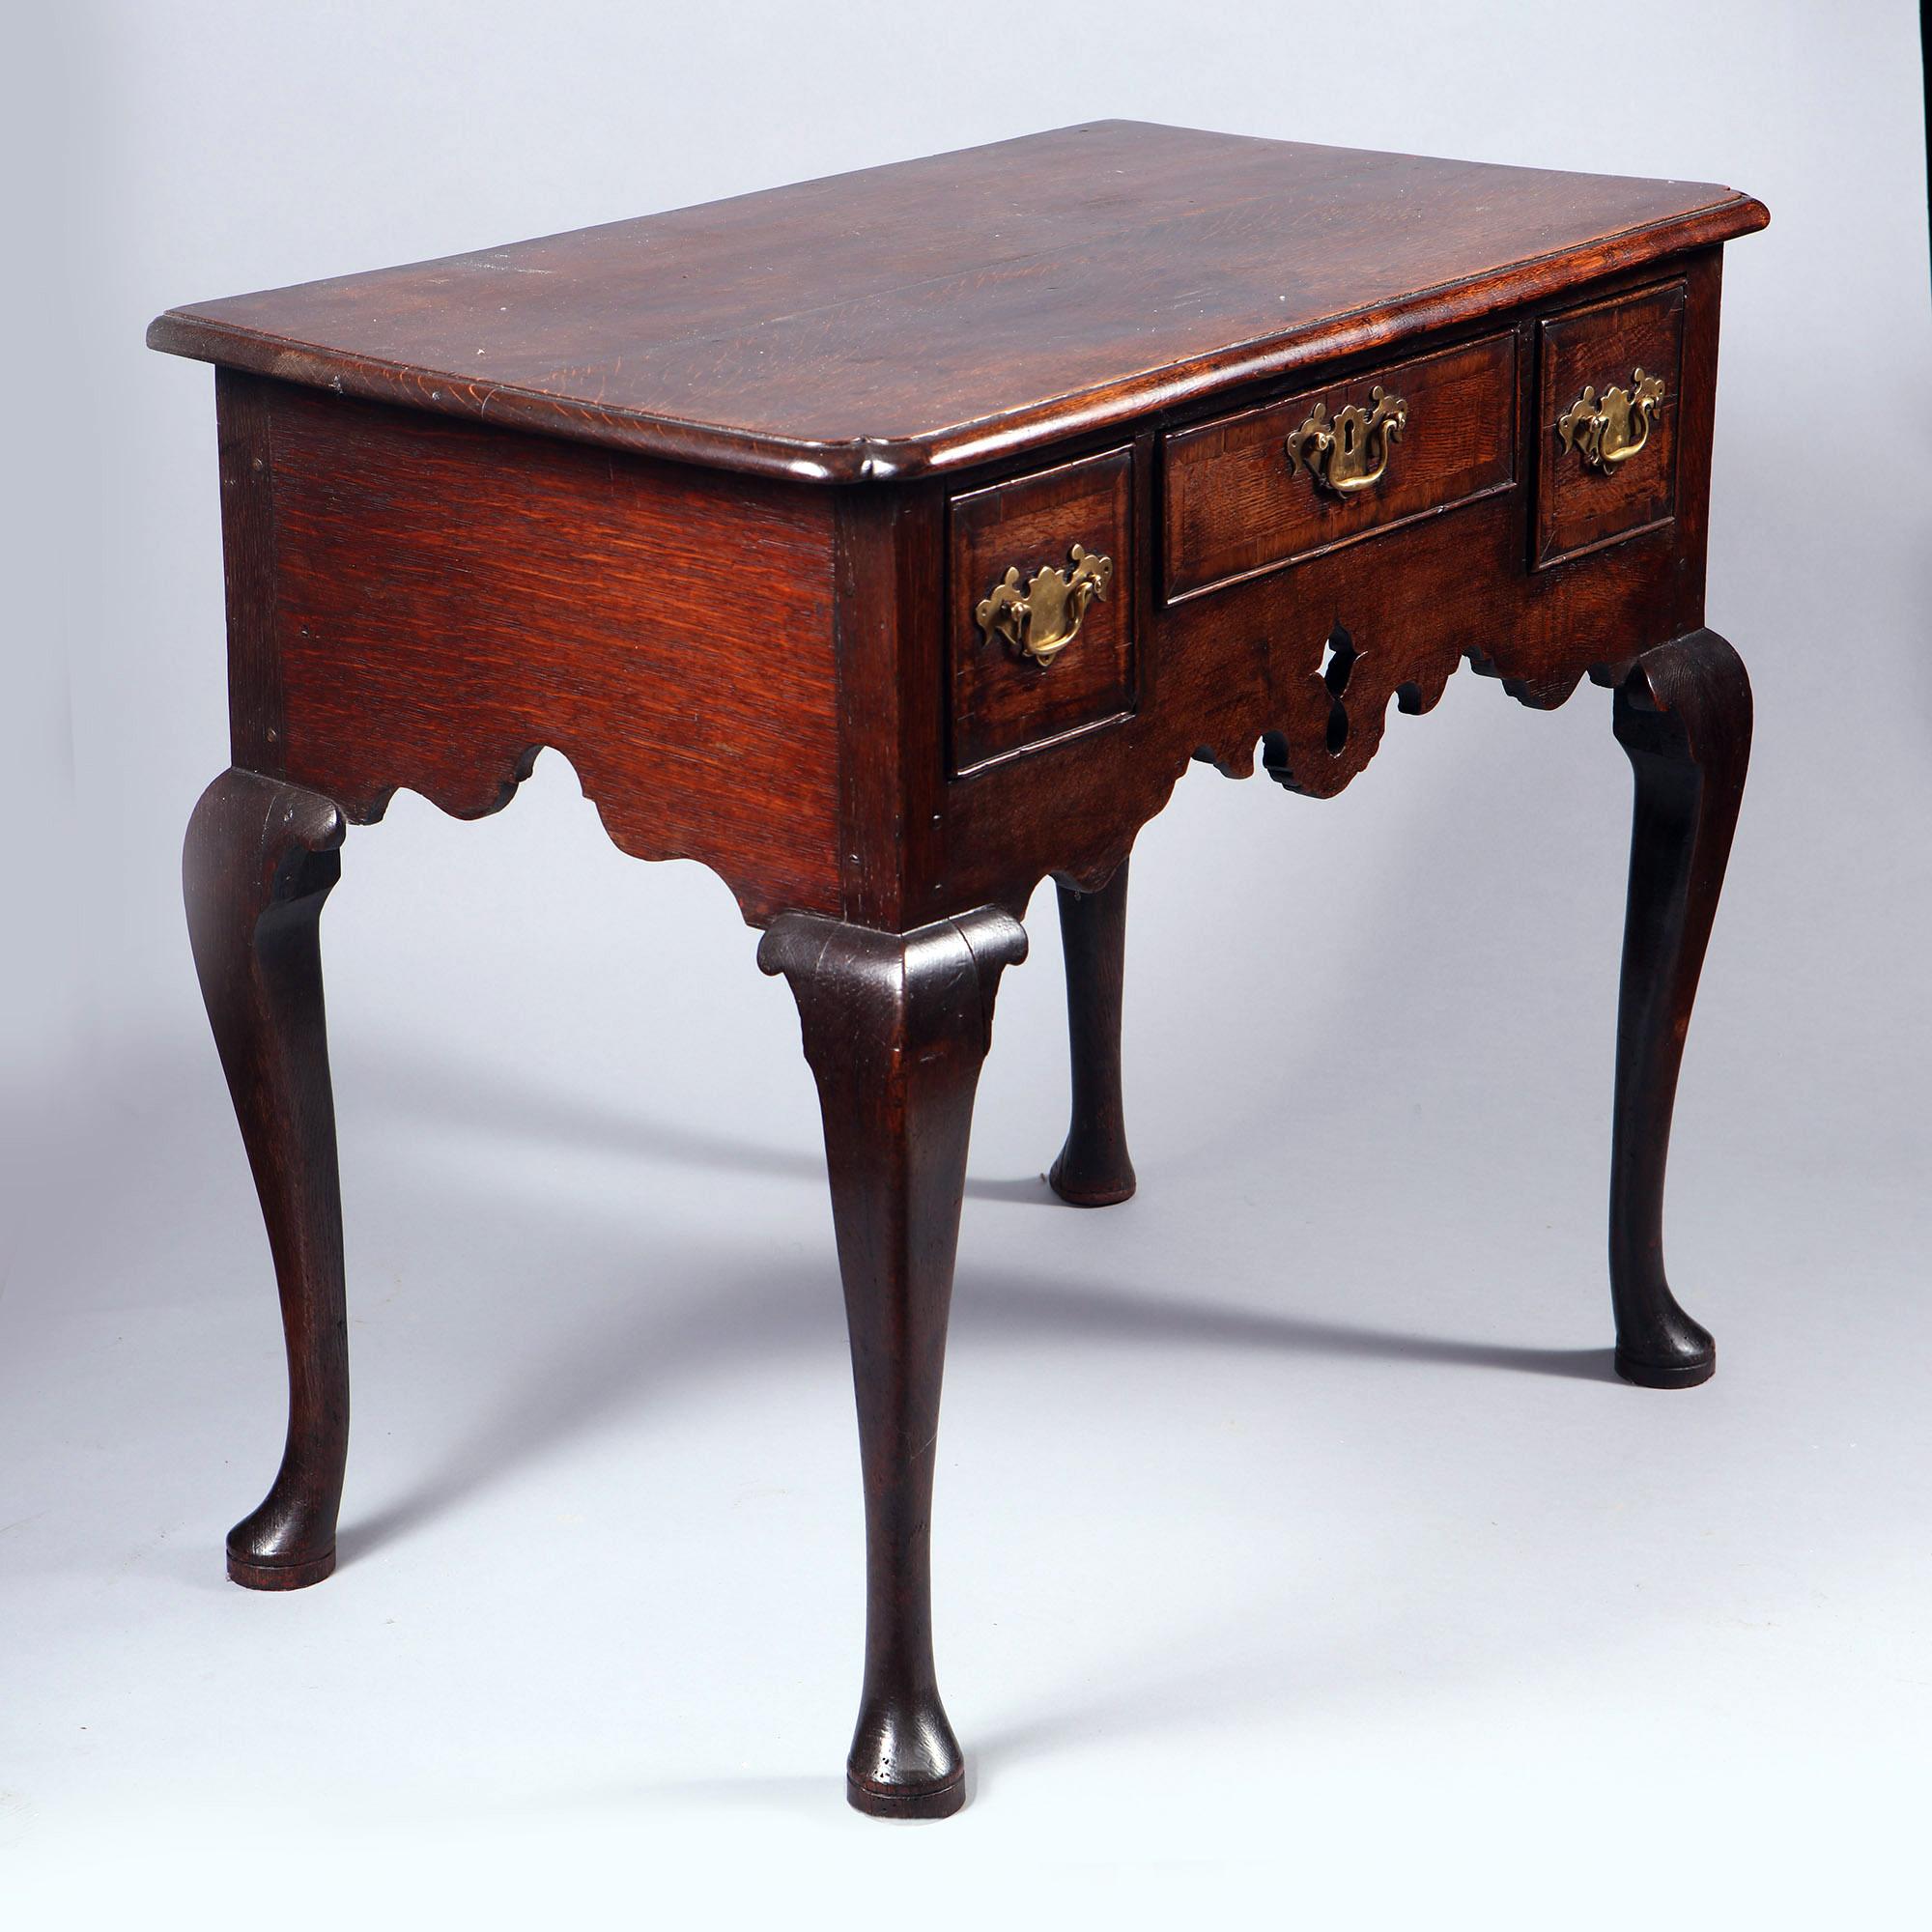 A fine early 18th century George I oak lowboy, the top with thumb molding and inswept corners above a bank of three drawers retaining their original brass hardware and iron locks, above and shaped pierced apron and raised on cabriole legs with pad